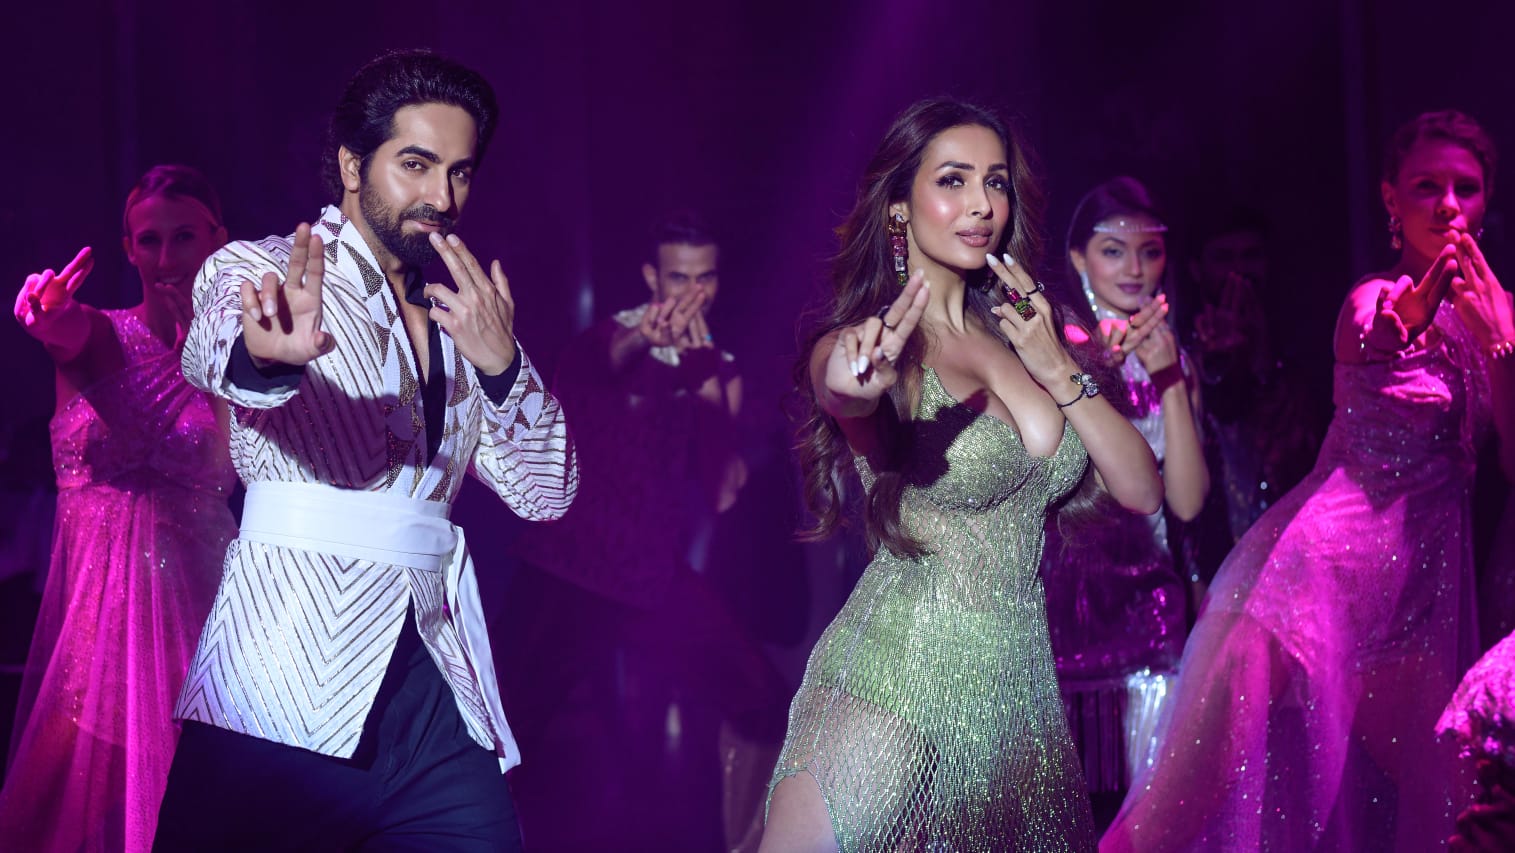 An absolute pleasure to dance with two of the biggest dancing stars of India - Malaika and Nora!’ : Ayushmann Khurrana